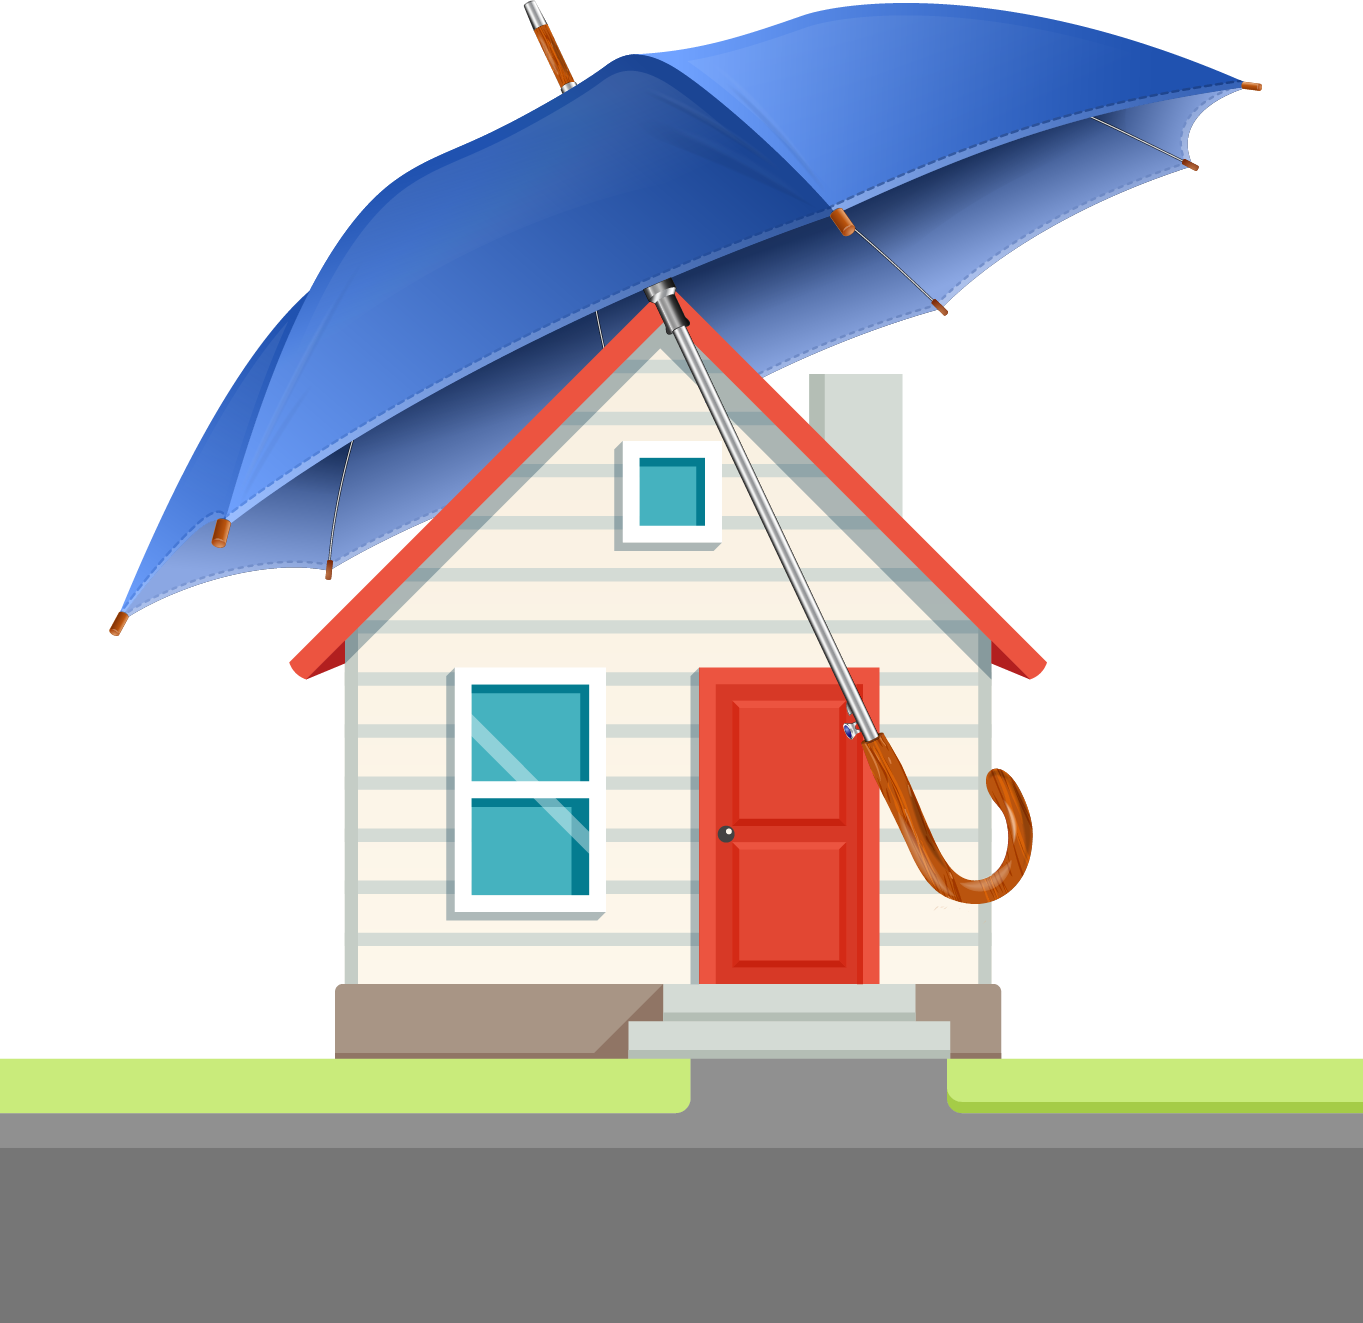 An illustration of a house covered by a large blue umbrella